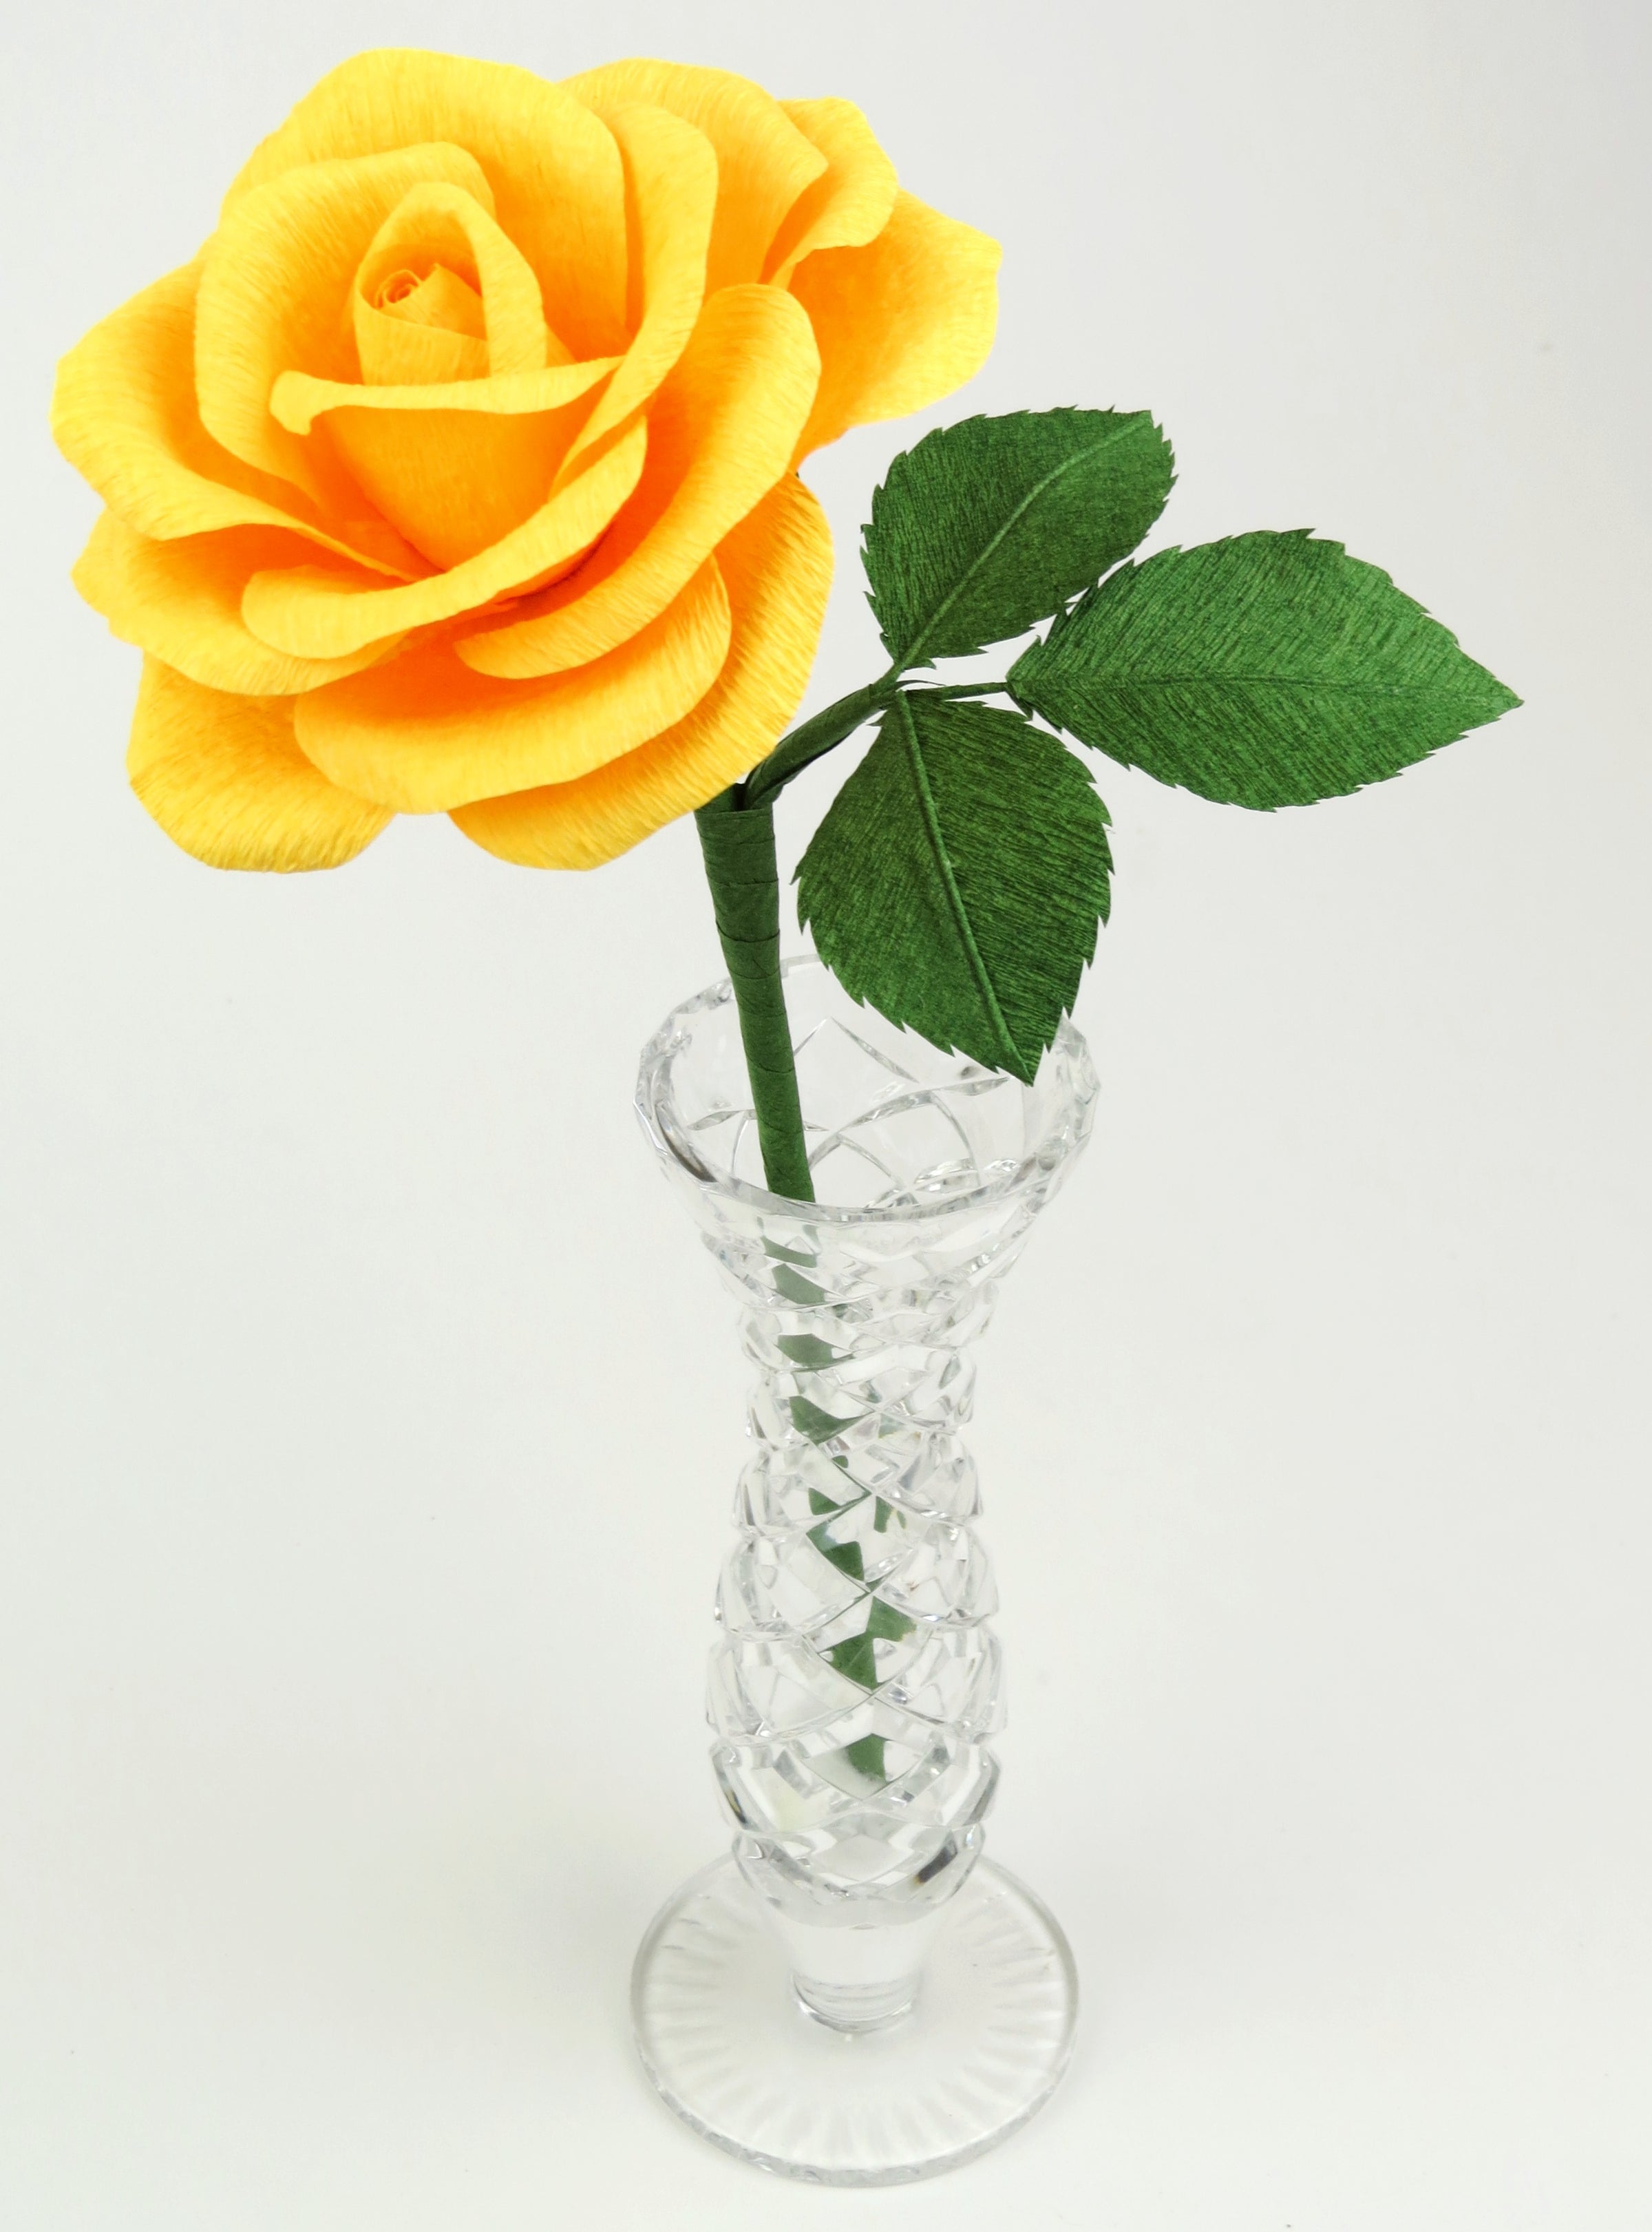 Yellow paper rose with three leaves standing in a narrow glass vase against a white backdrop